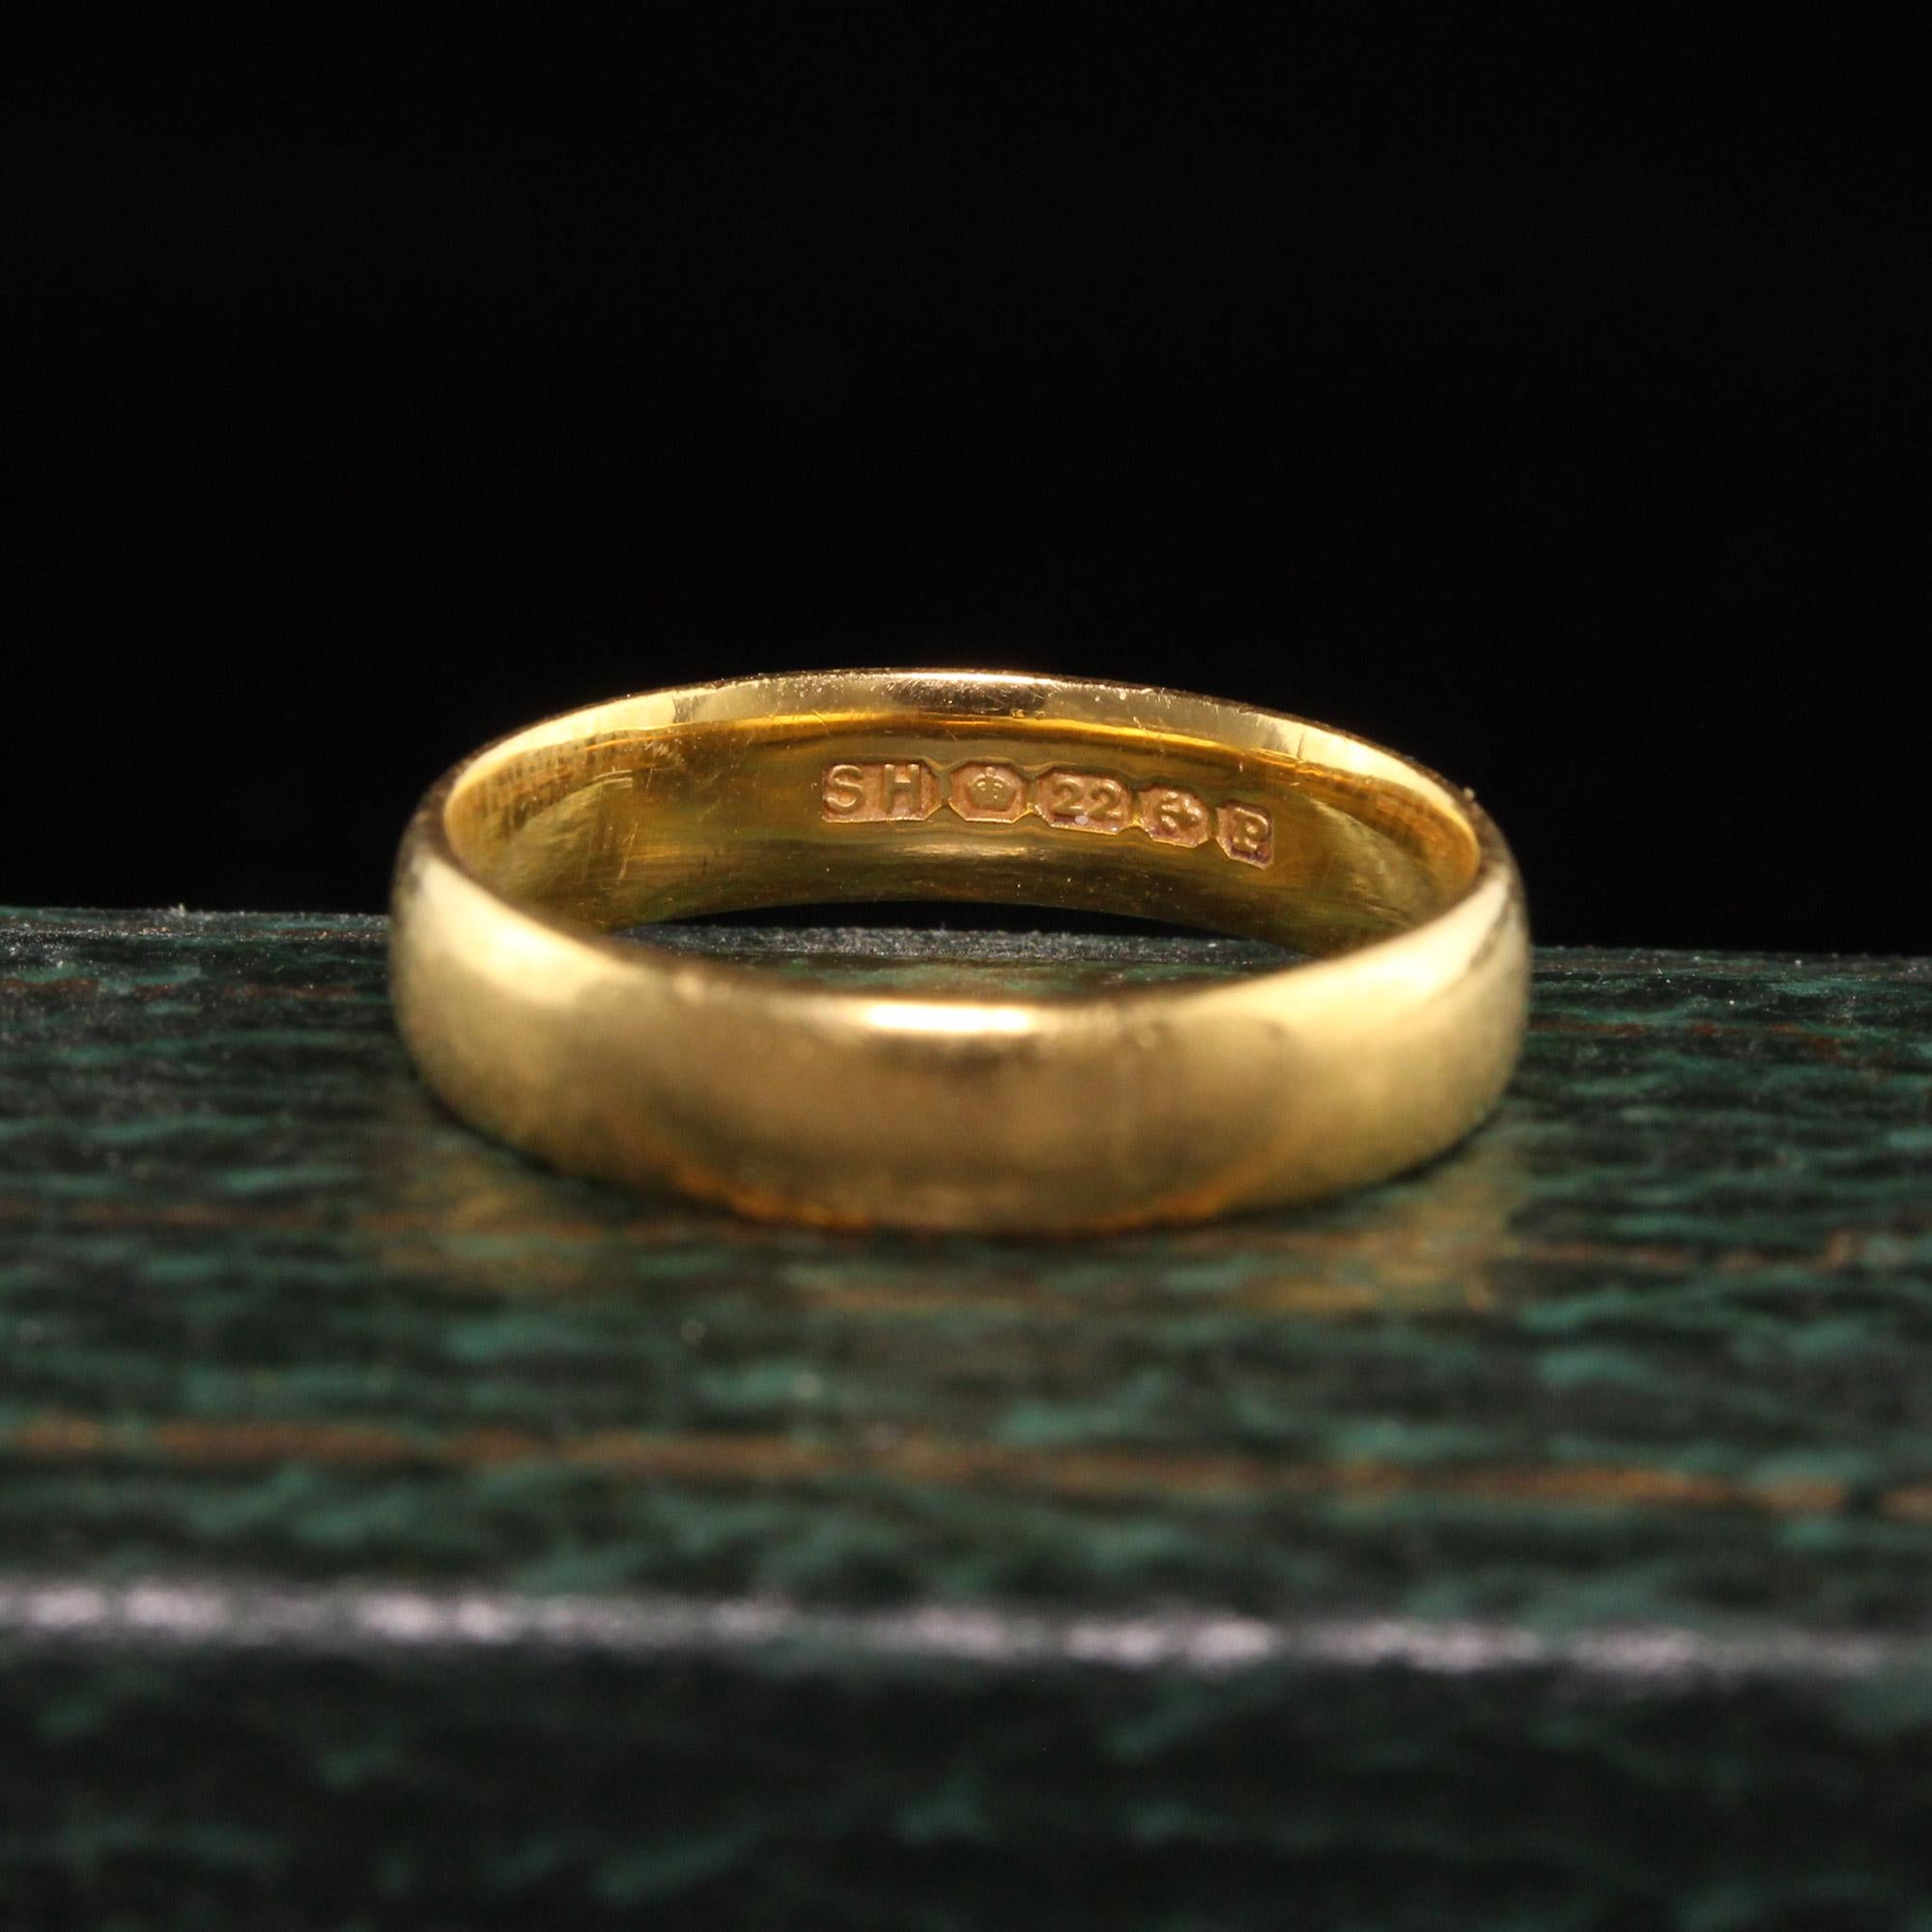 Beautiful Antique Art Deco 22K Yellow Gold English Wedding Band - Size 3 1/2. This classic wedding band is crafted in 22k yellow gold and is fully hallmarked with english and gold purity marks!

Item #R0784

Metal: 22K Yellow Gold

Weight: 2.7